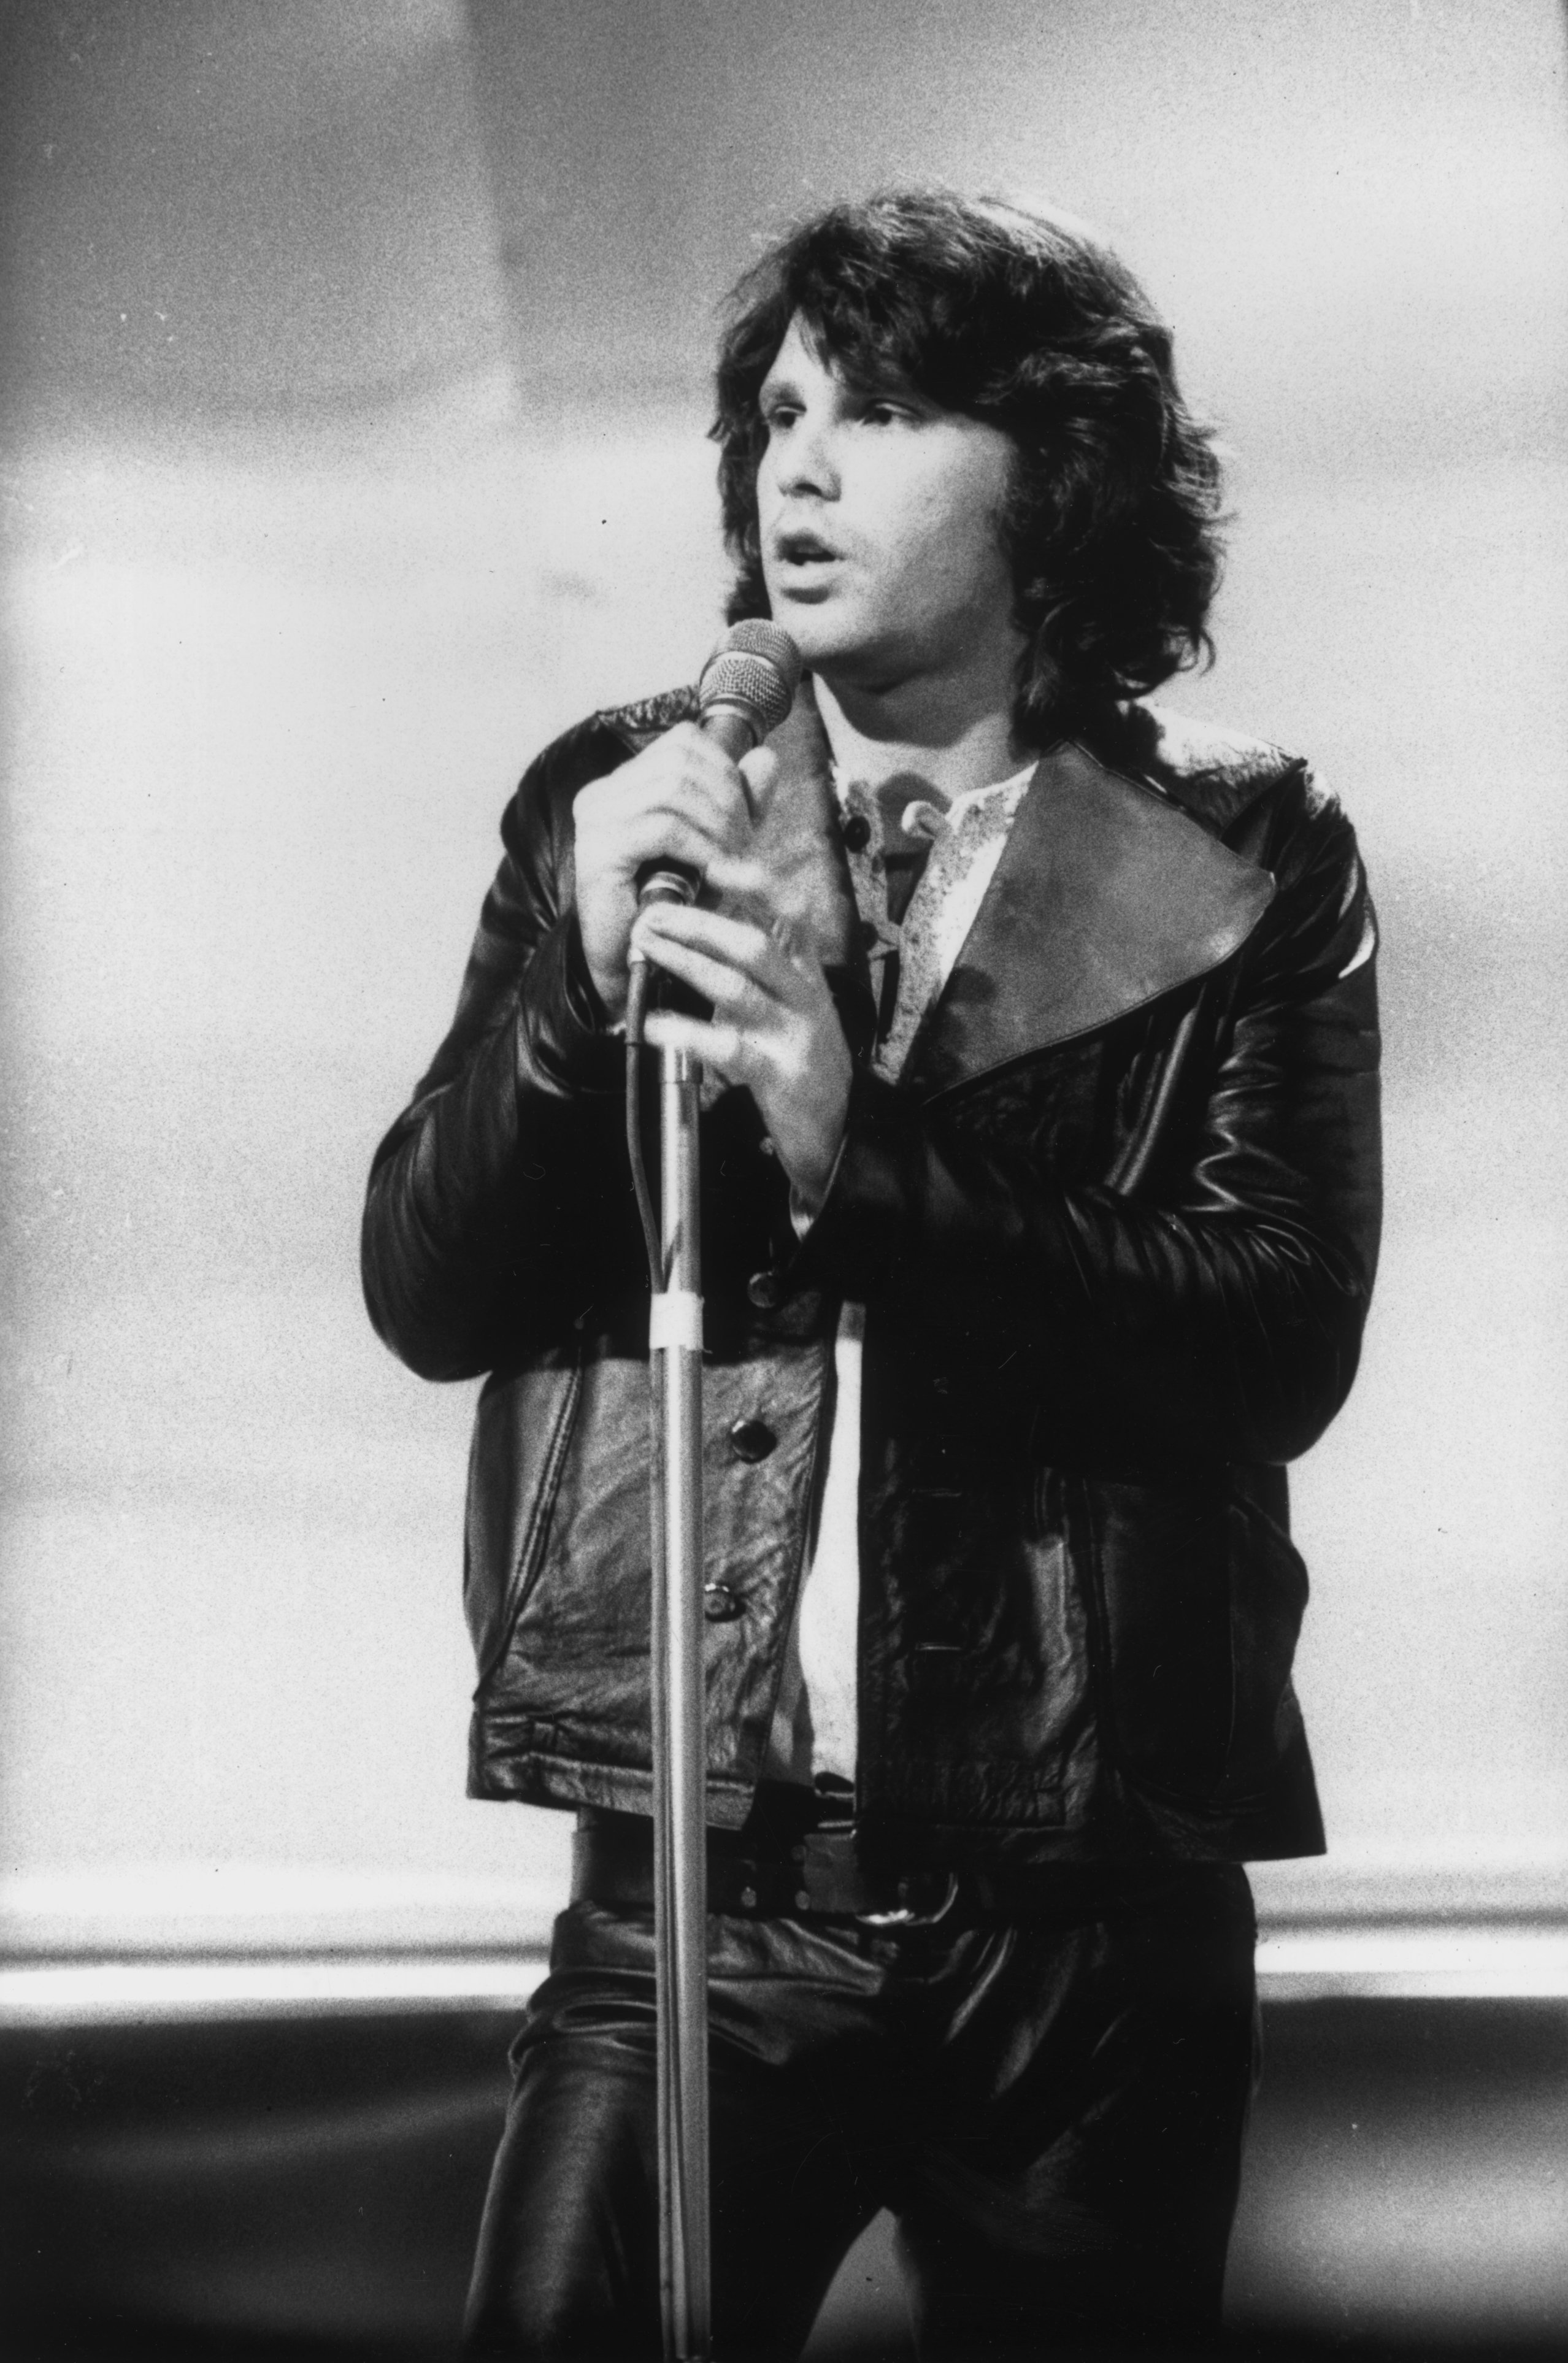 Doors singer Jim Morrison (1943 - 1971) making a television appearance in Britain, circa 1970. | Source: Getty Images